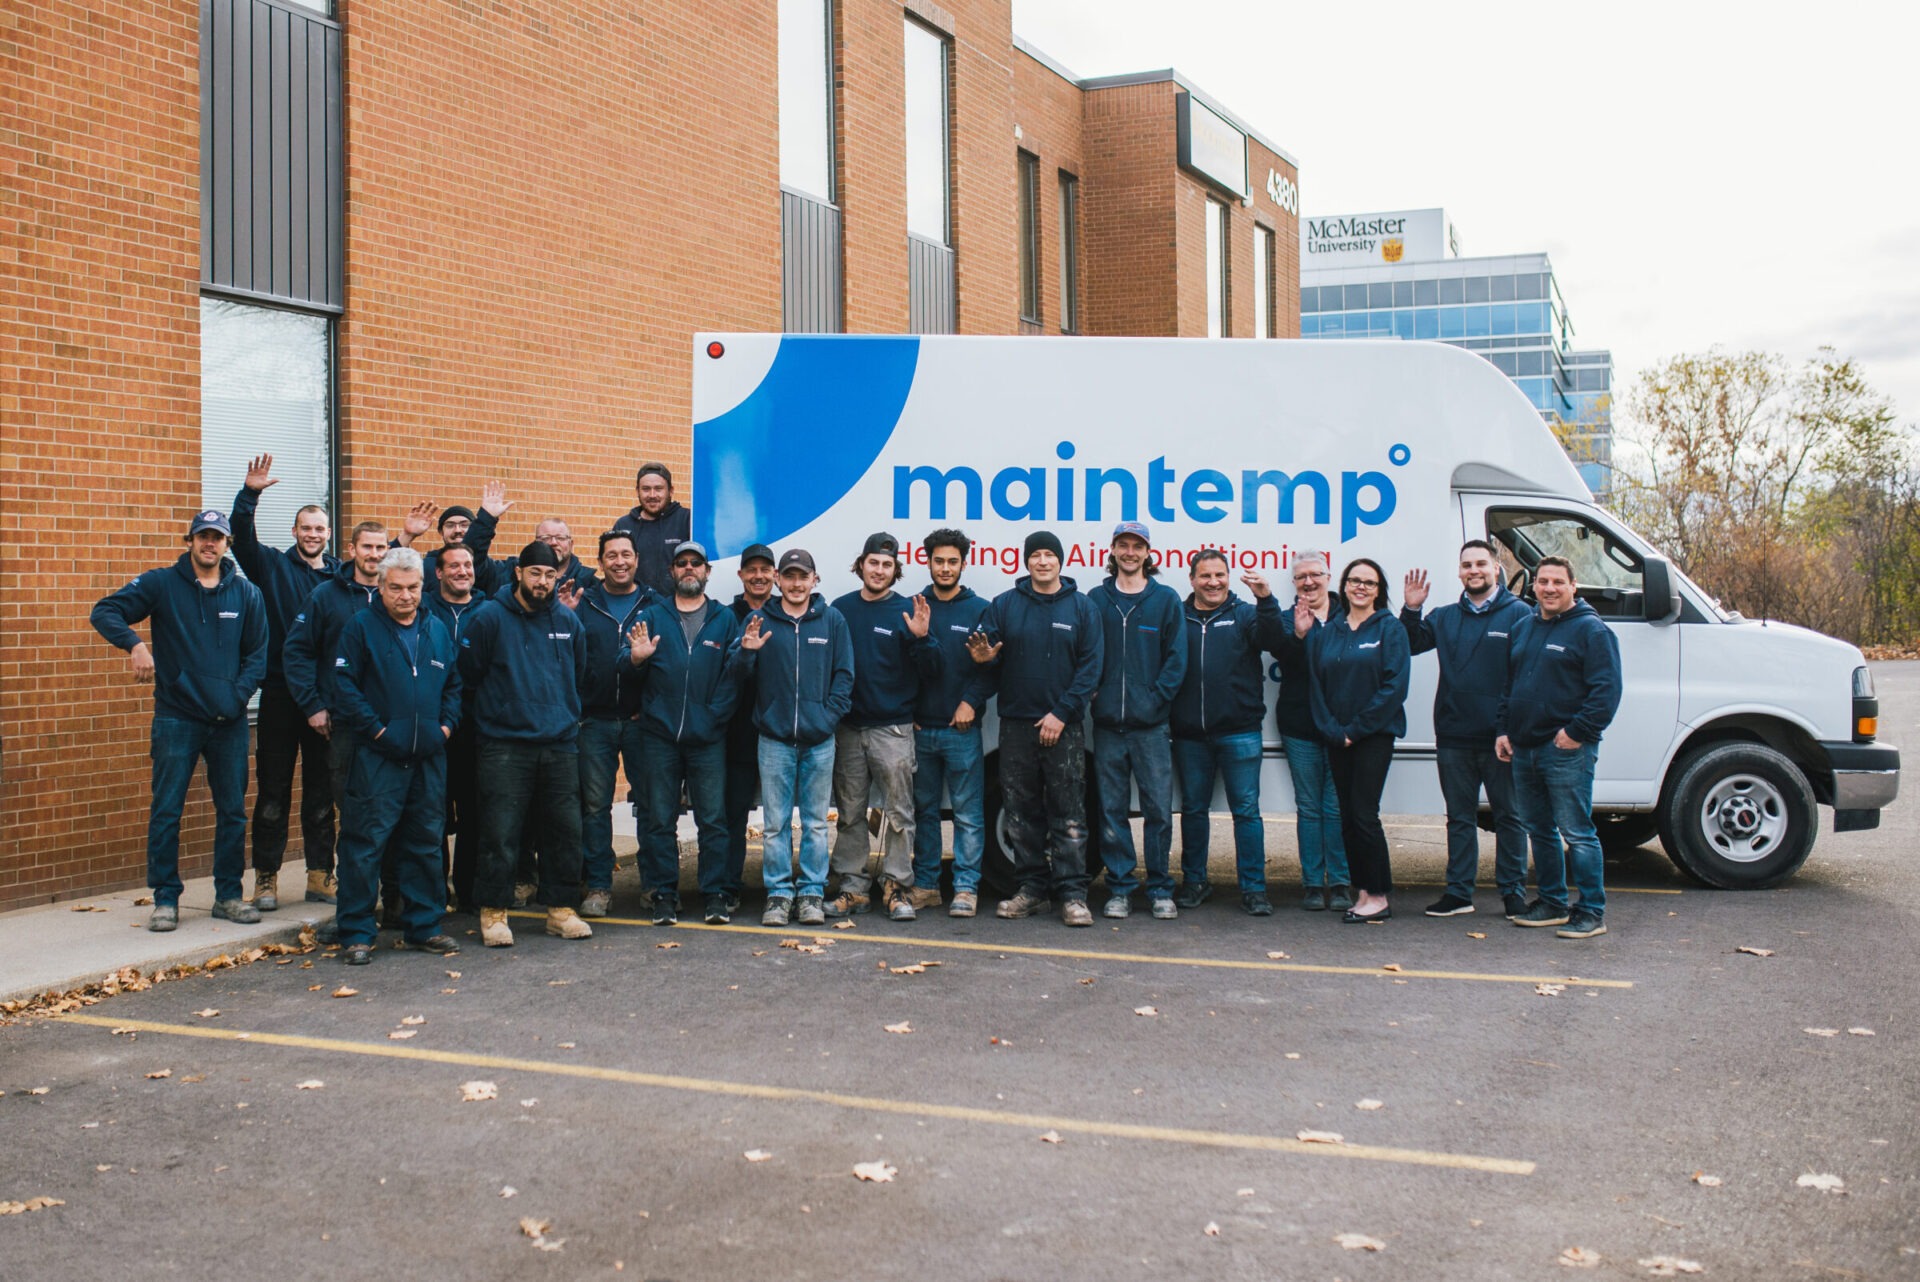 A group of smiling people in matching work uniforms pose in front of a large van with "maintemp" logo, outside a brick building with trees.